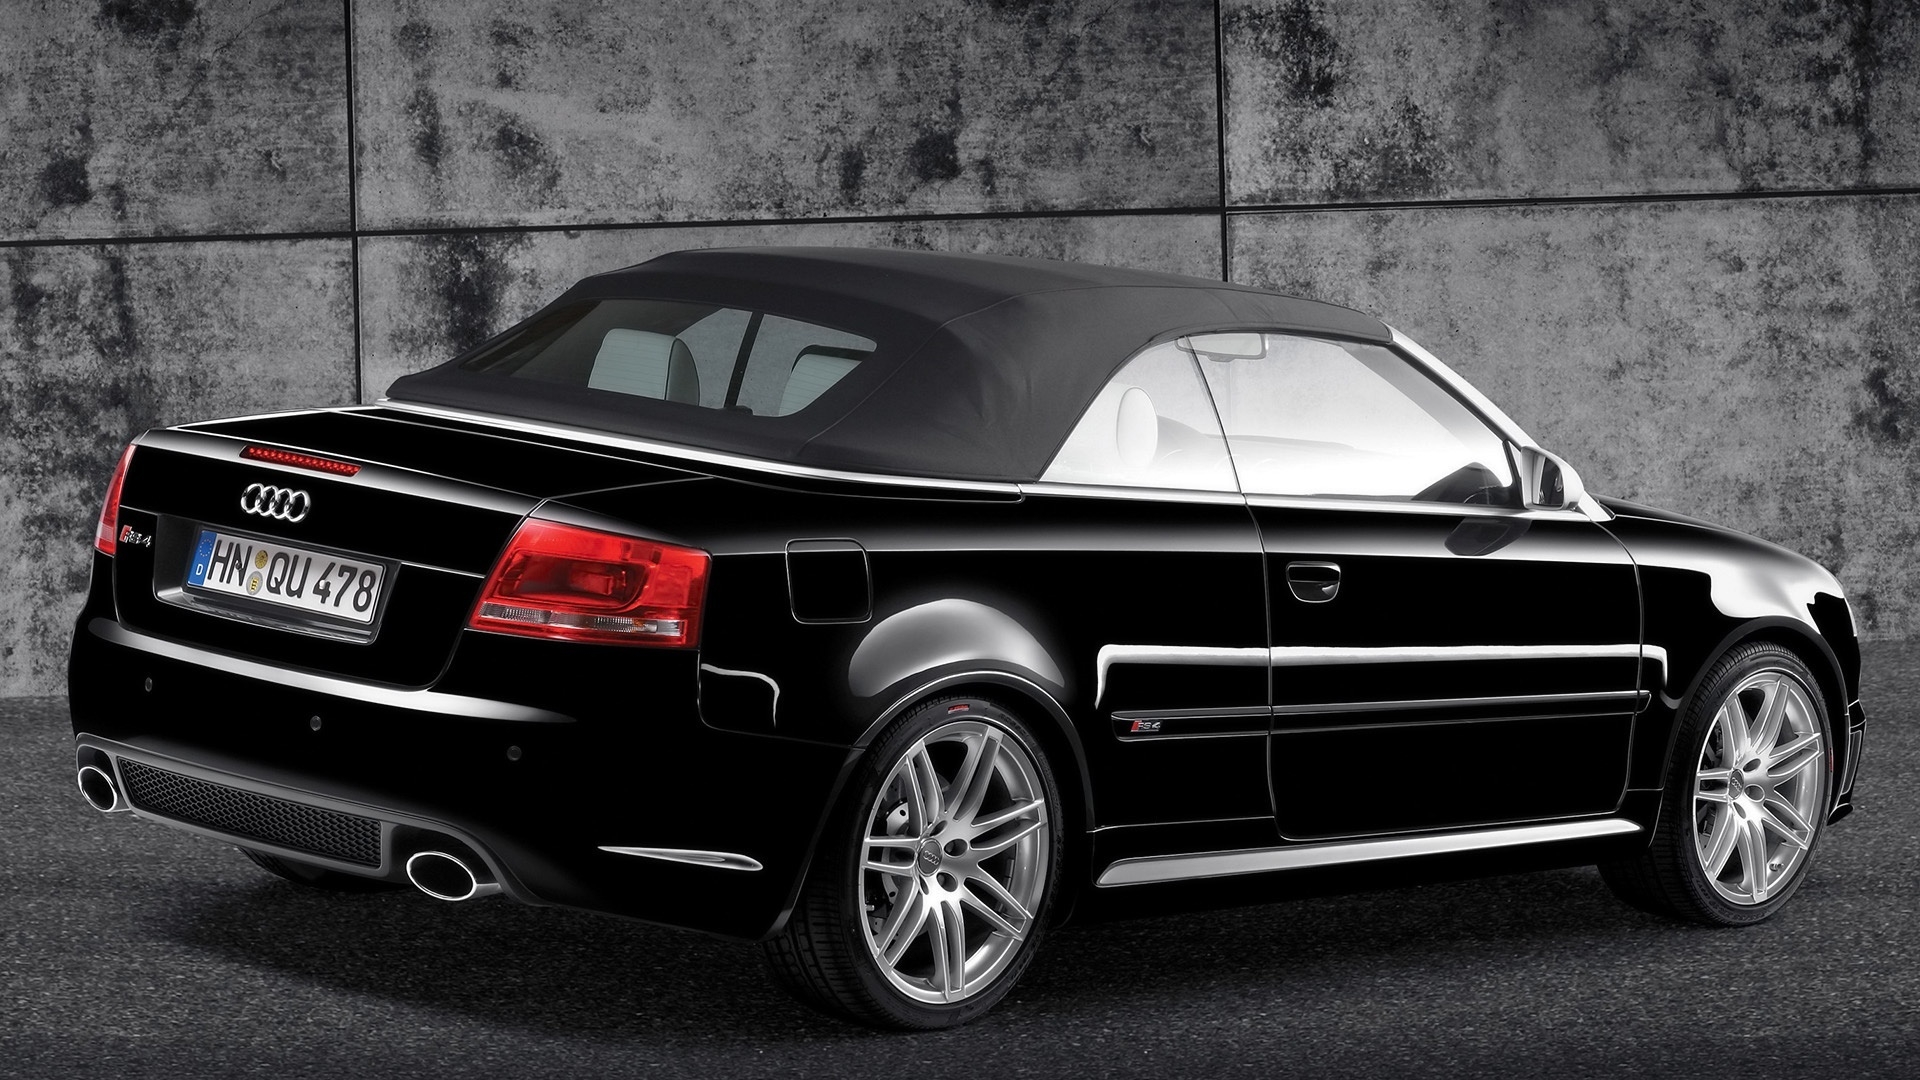 Audi RS 4 Cabriolet Black Rear And Side 2008 for 1920 x 1080 HDTV 1080p resolution